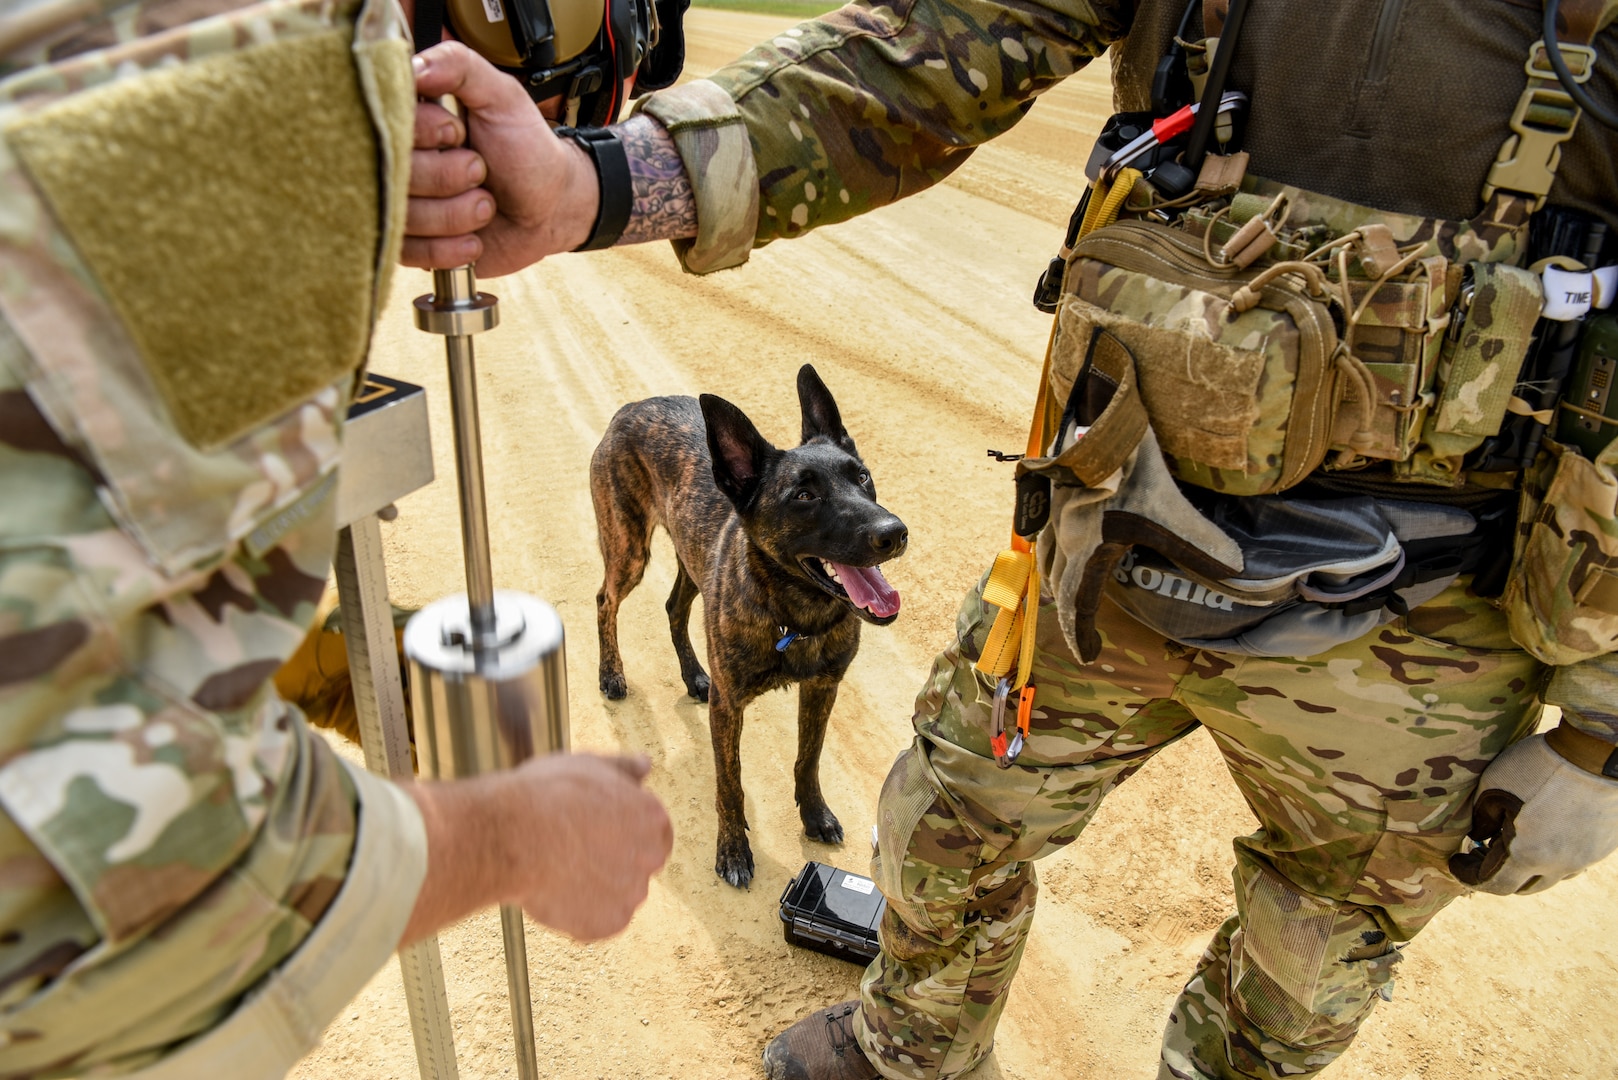 Callie, a search and rescue K-9 for the 123rd Special Tactics Squadron, participates in Patriot North, an annual domestic operations exercise designed to provide natural disaster response training at Fort McCoy, Wis., July 17, 2019.